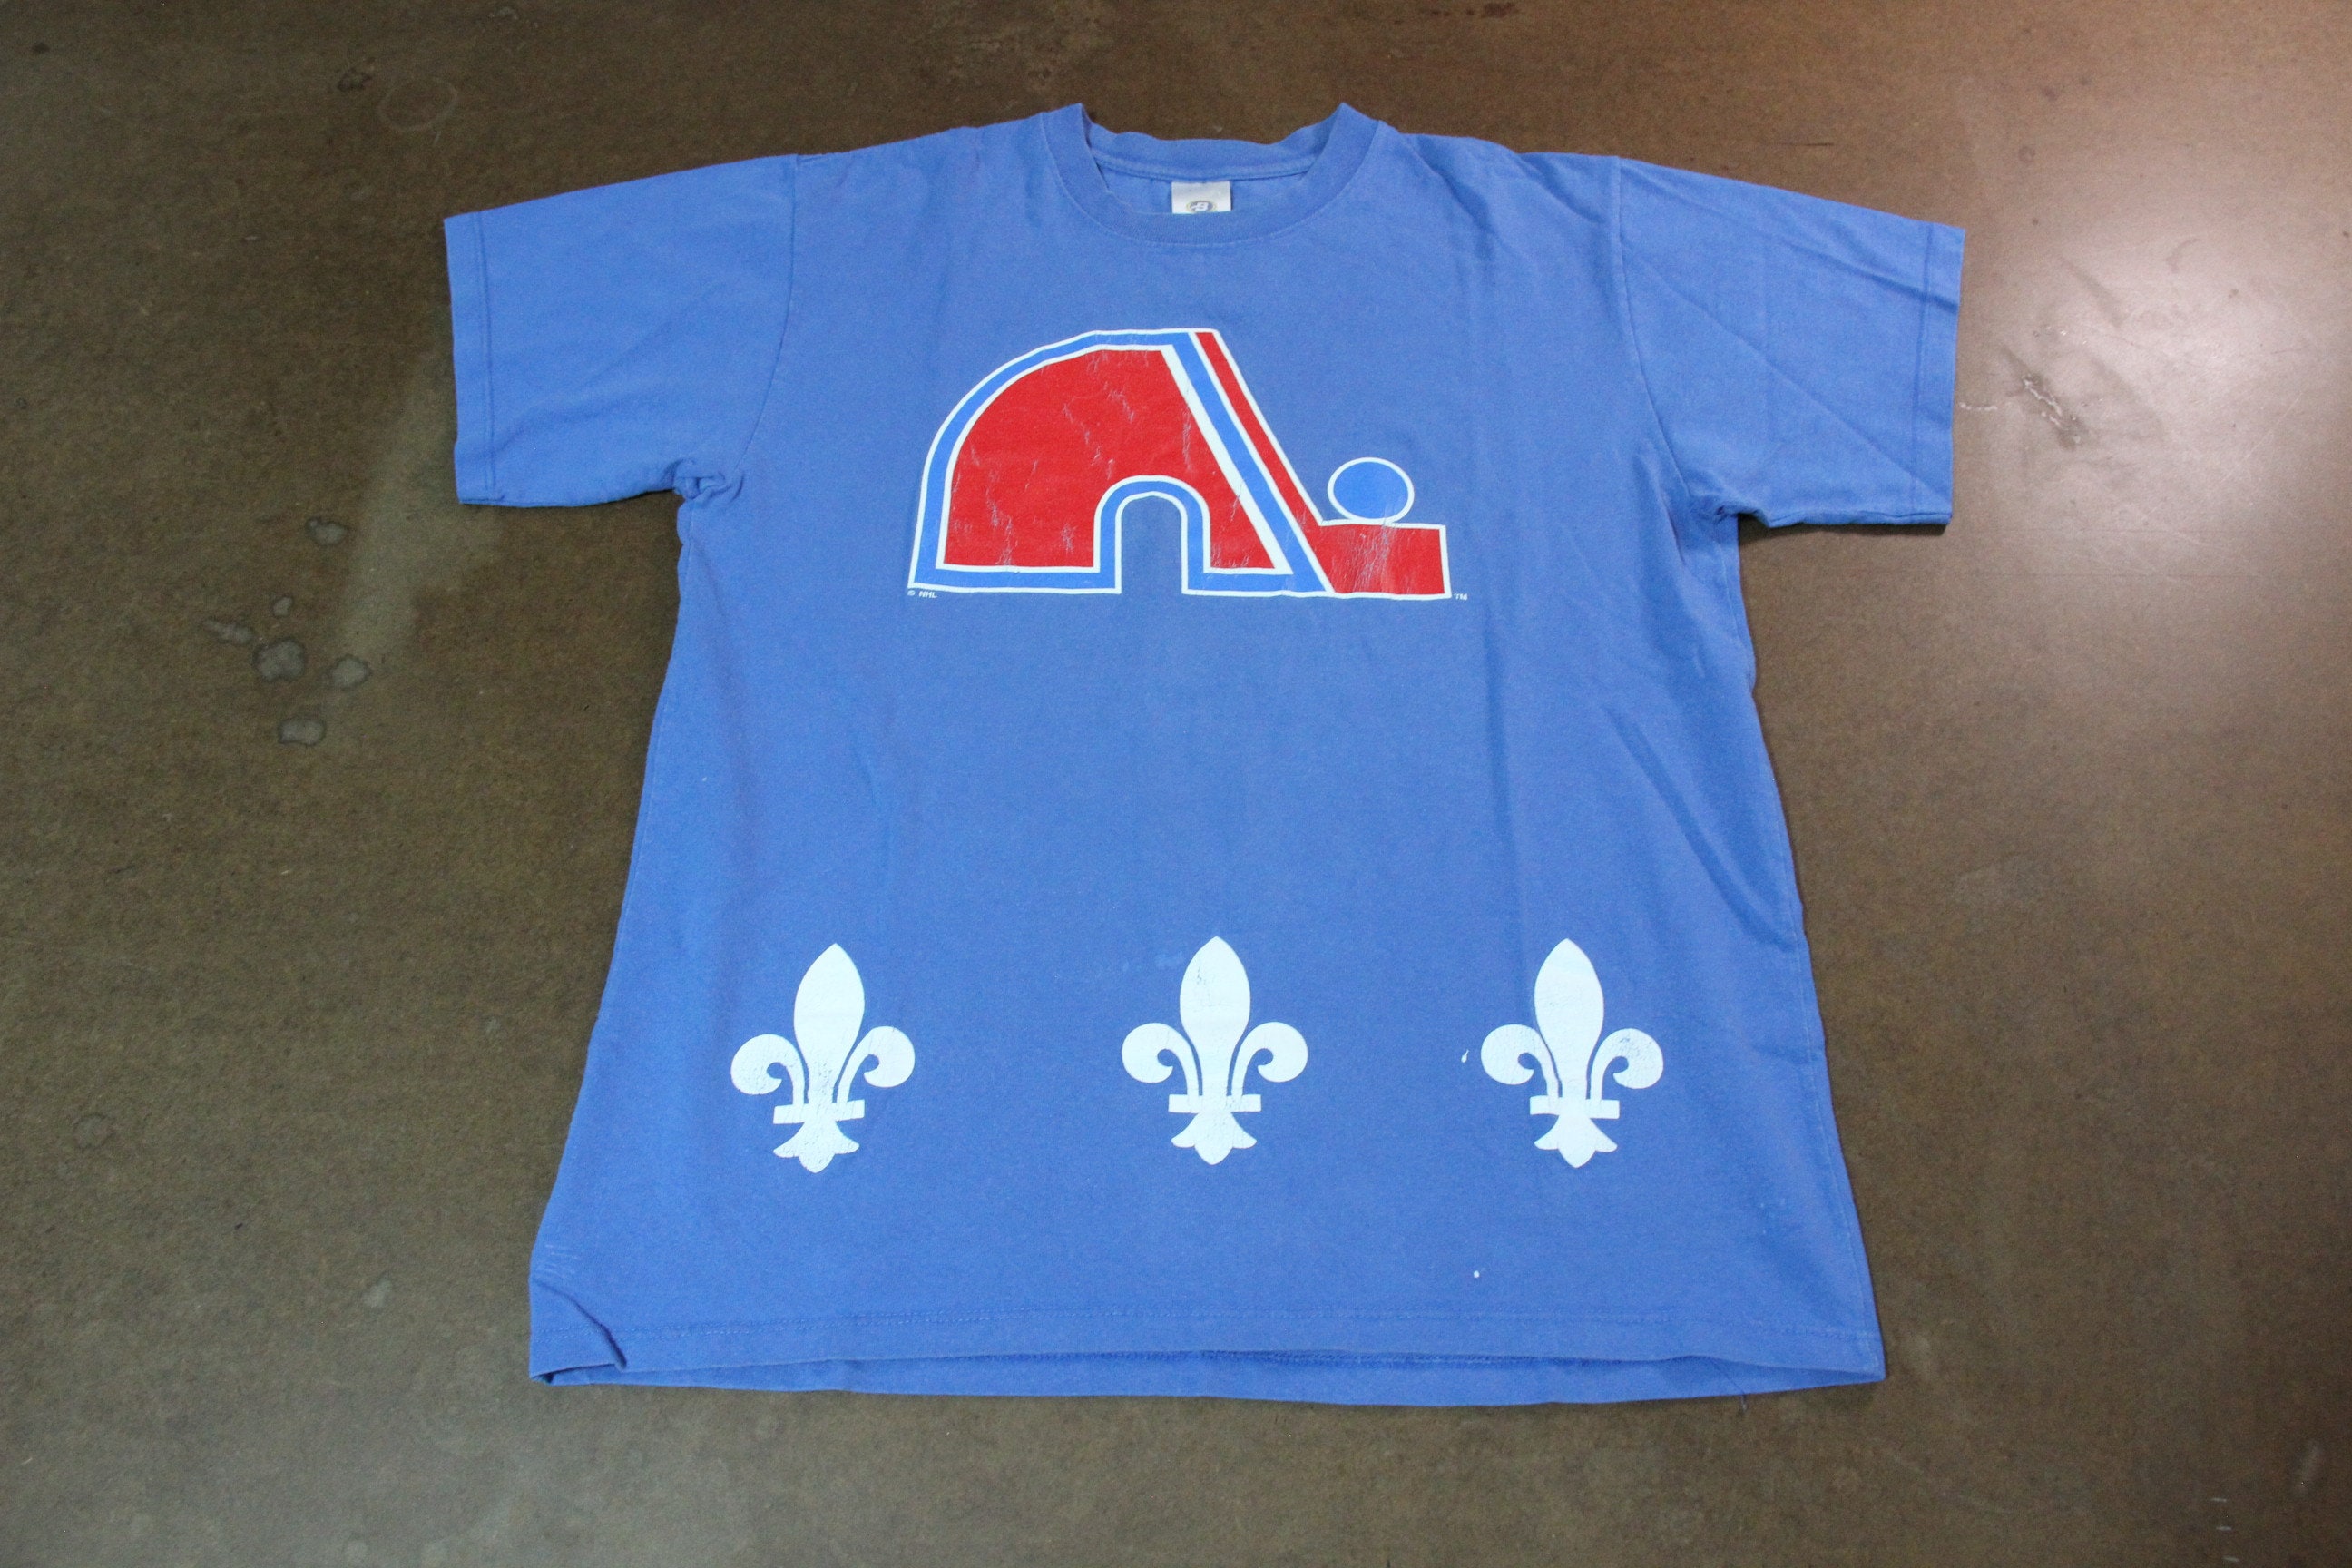 A photo of former Canadian NHL team the Quebec Nordiques, : r/nhl